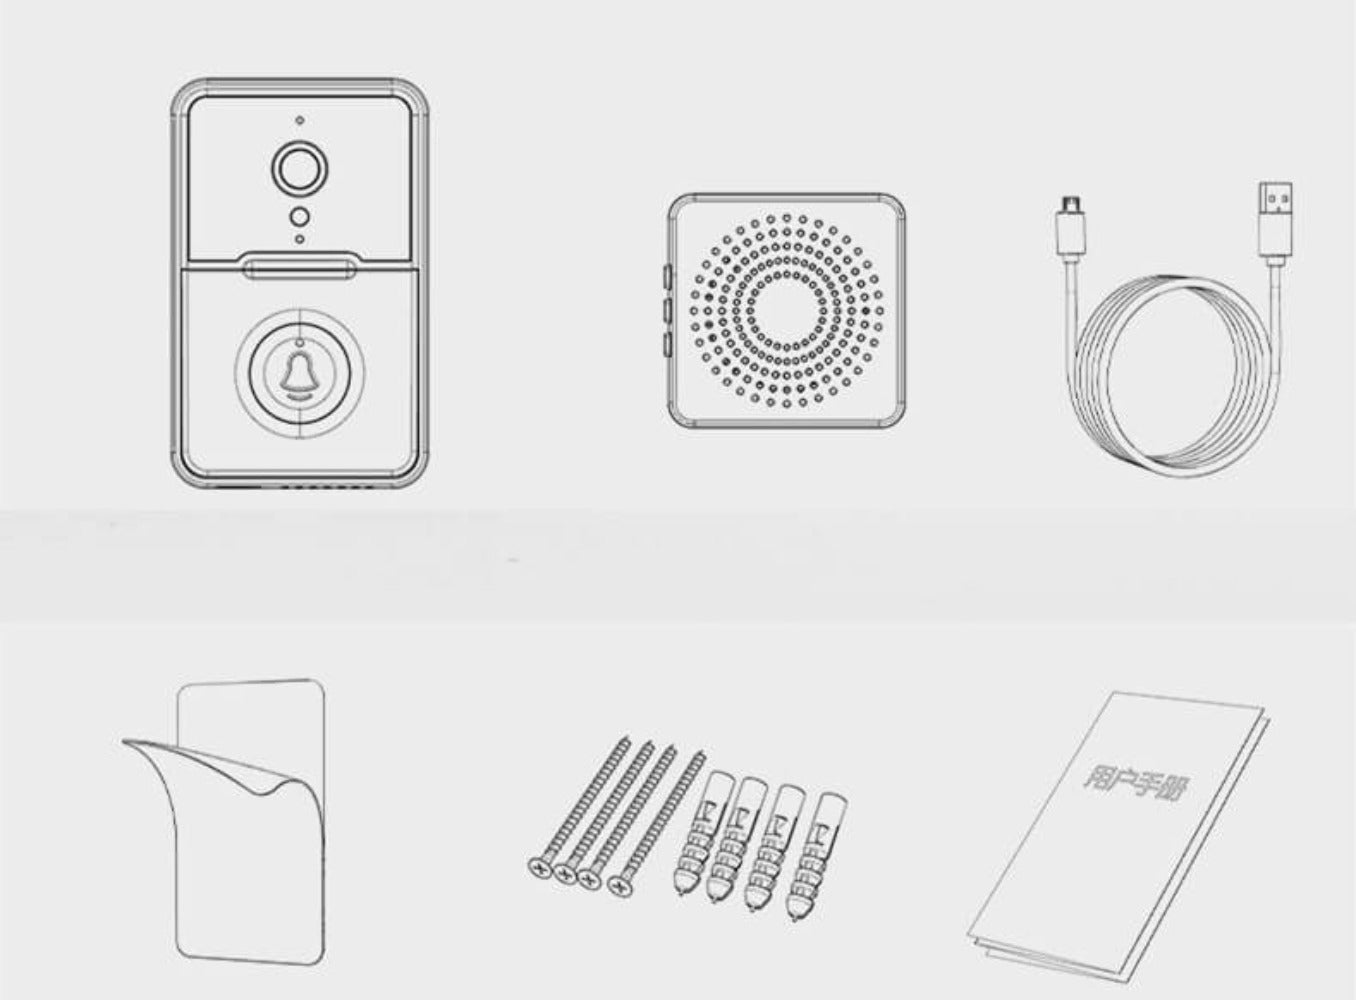 Graphics depicting the smart control video doorbells contents. The indoor and outdoor device accompanied by the charging cable, sticky pad, screws and plugs and instruction manual.